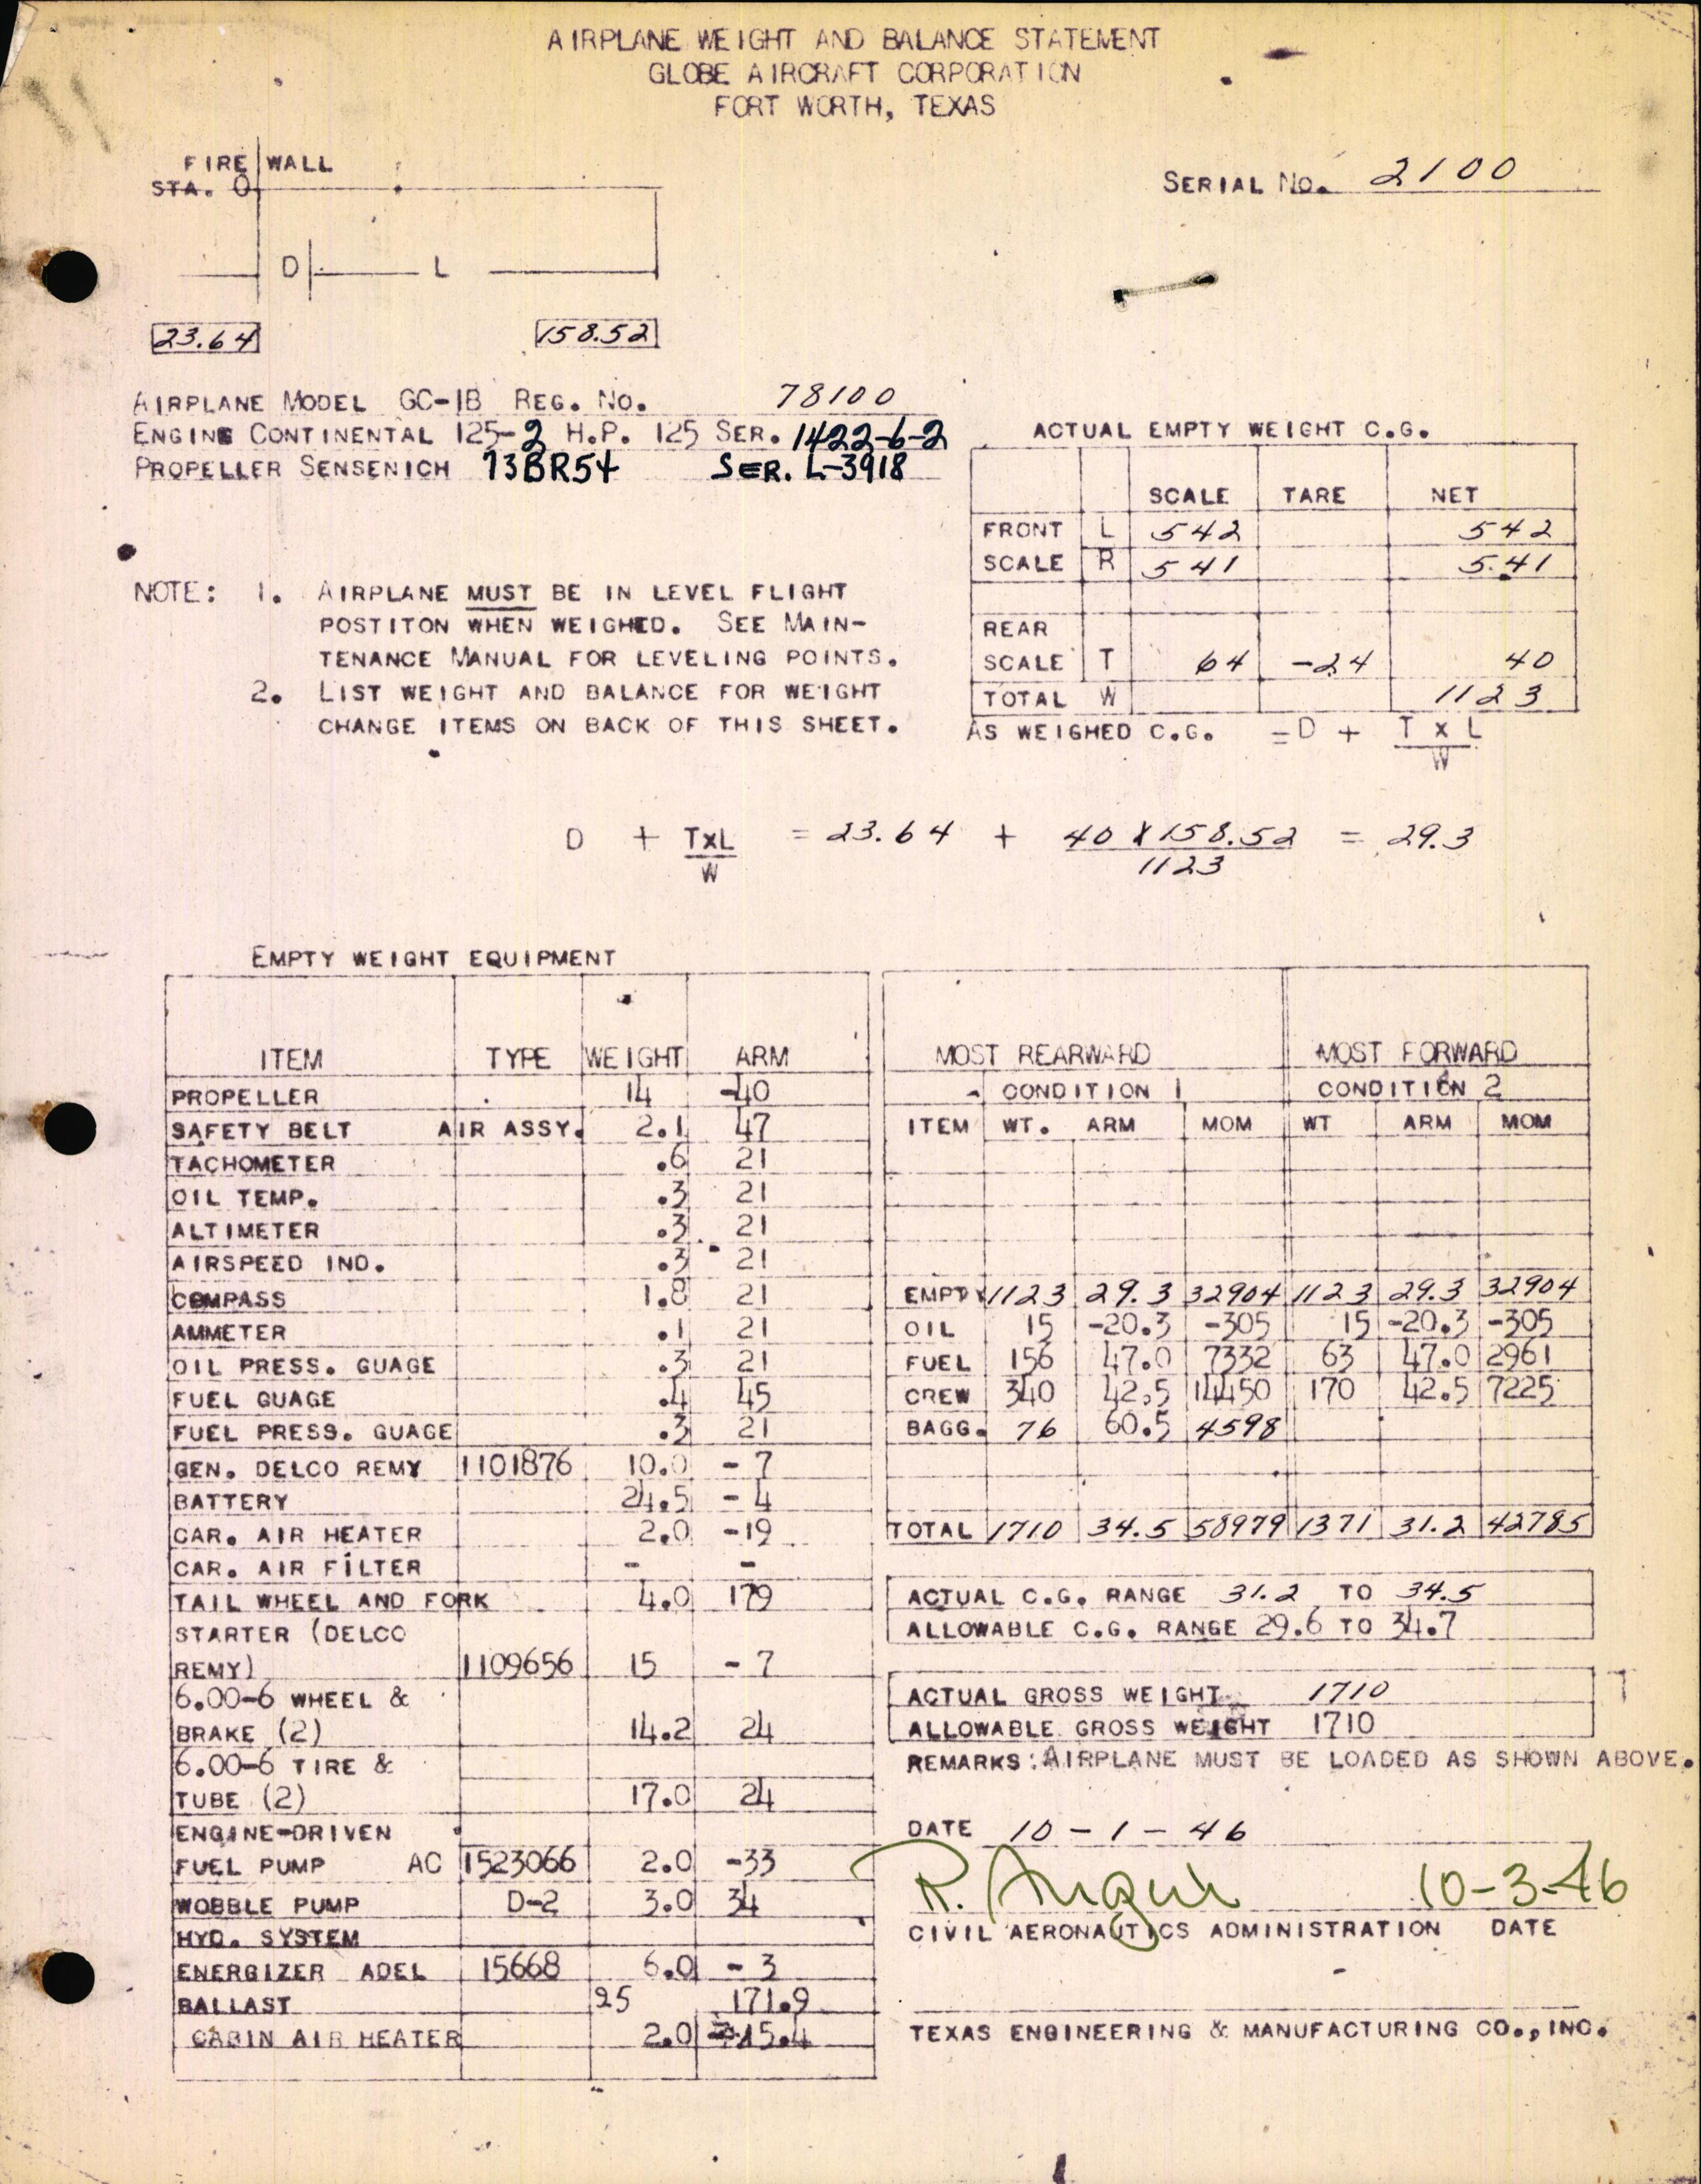 Sample page 3 from AirCorps Library document: Technical Information for Serial Number 2100